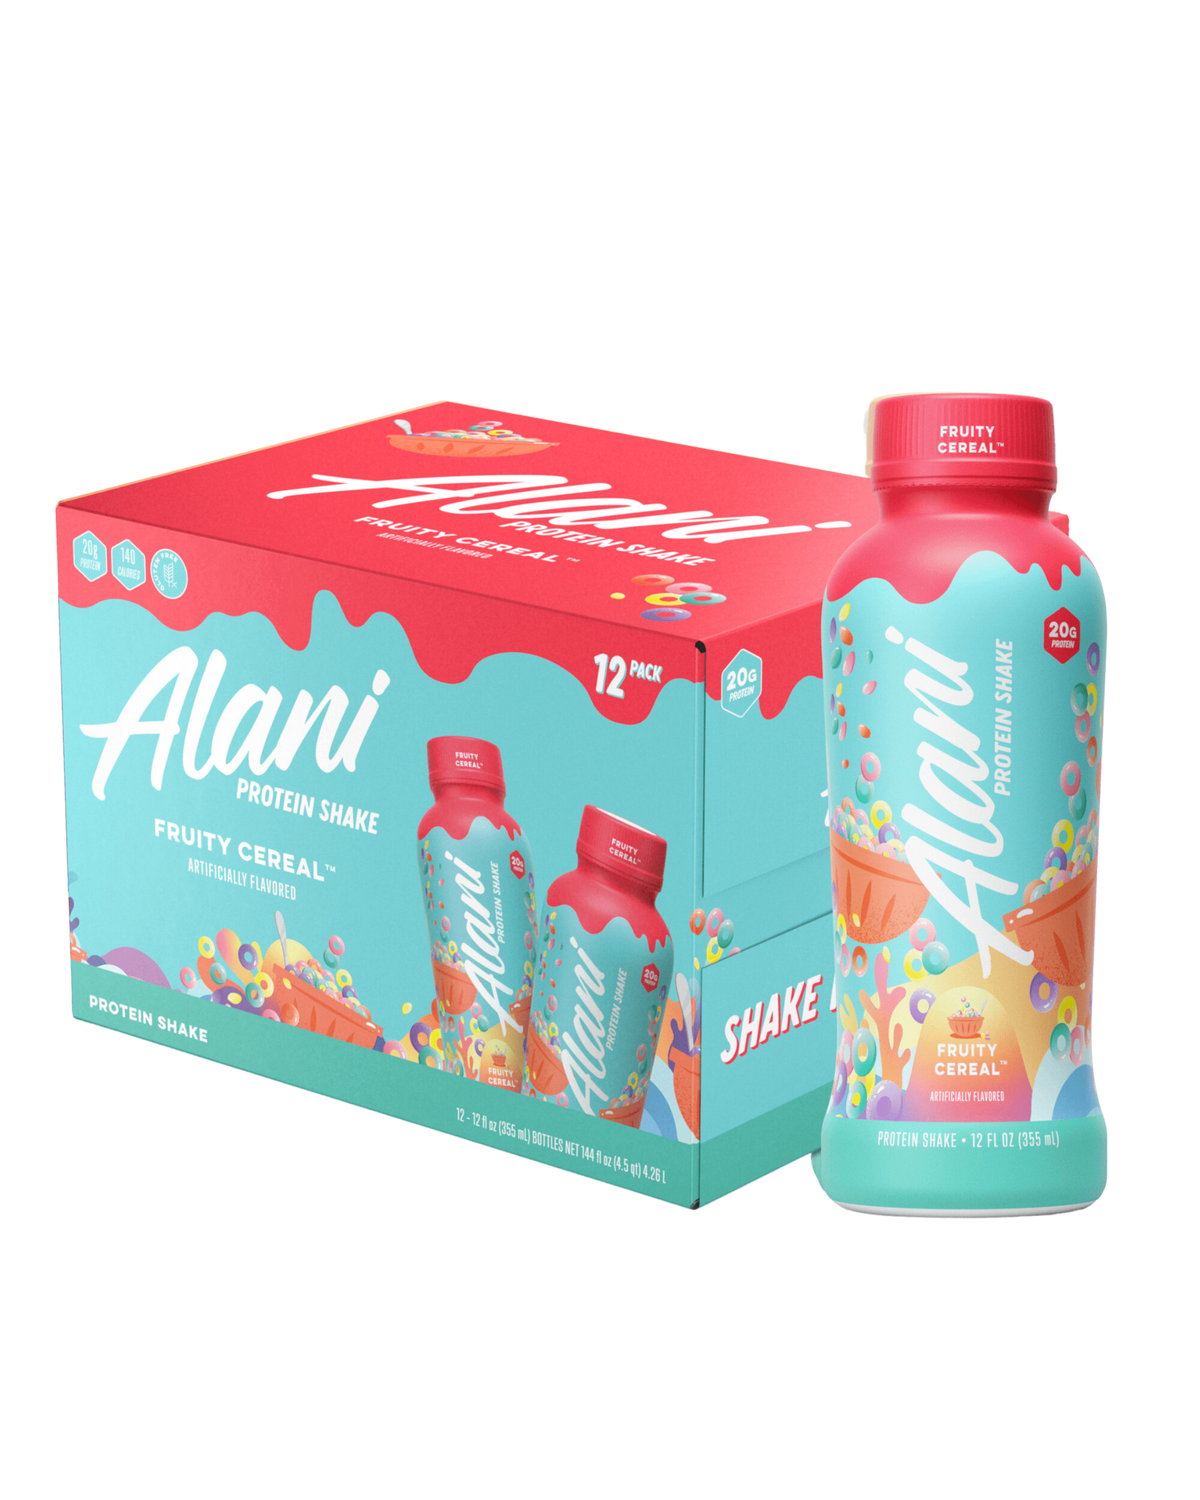 A 12 pack box of Alani Nu Protein Shake in Fruity Cereal flavor.